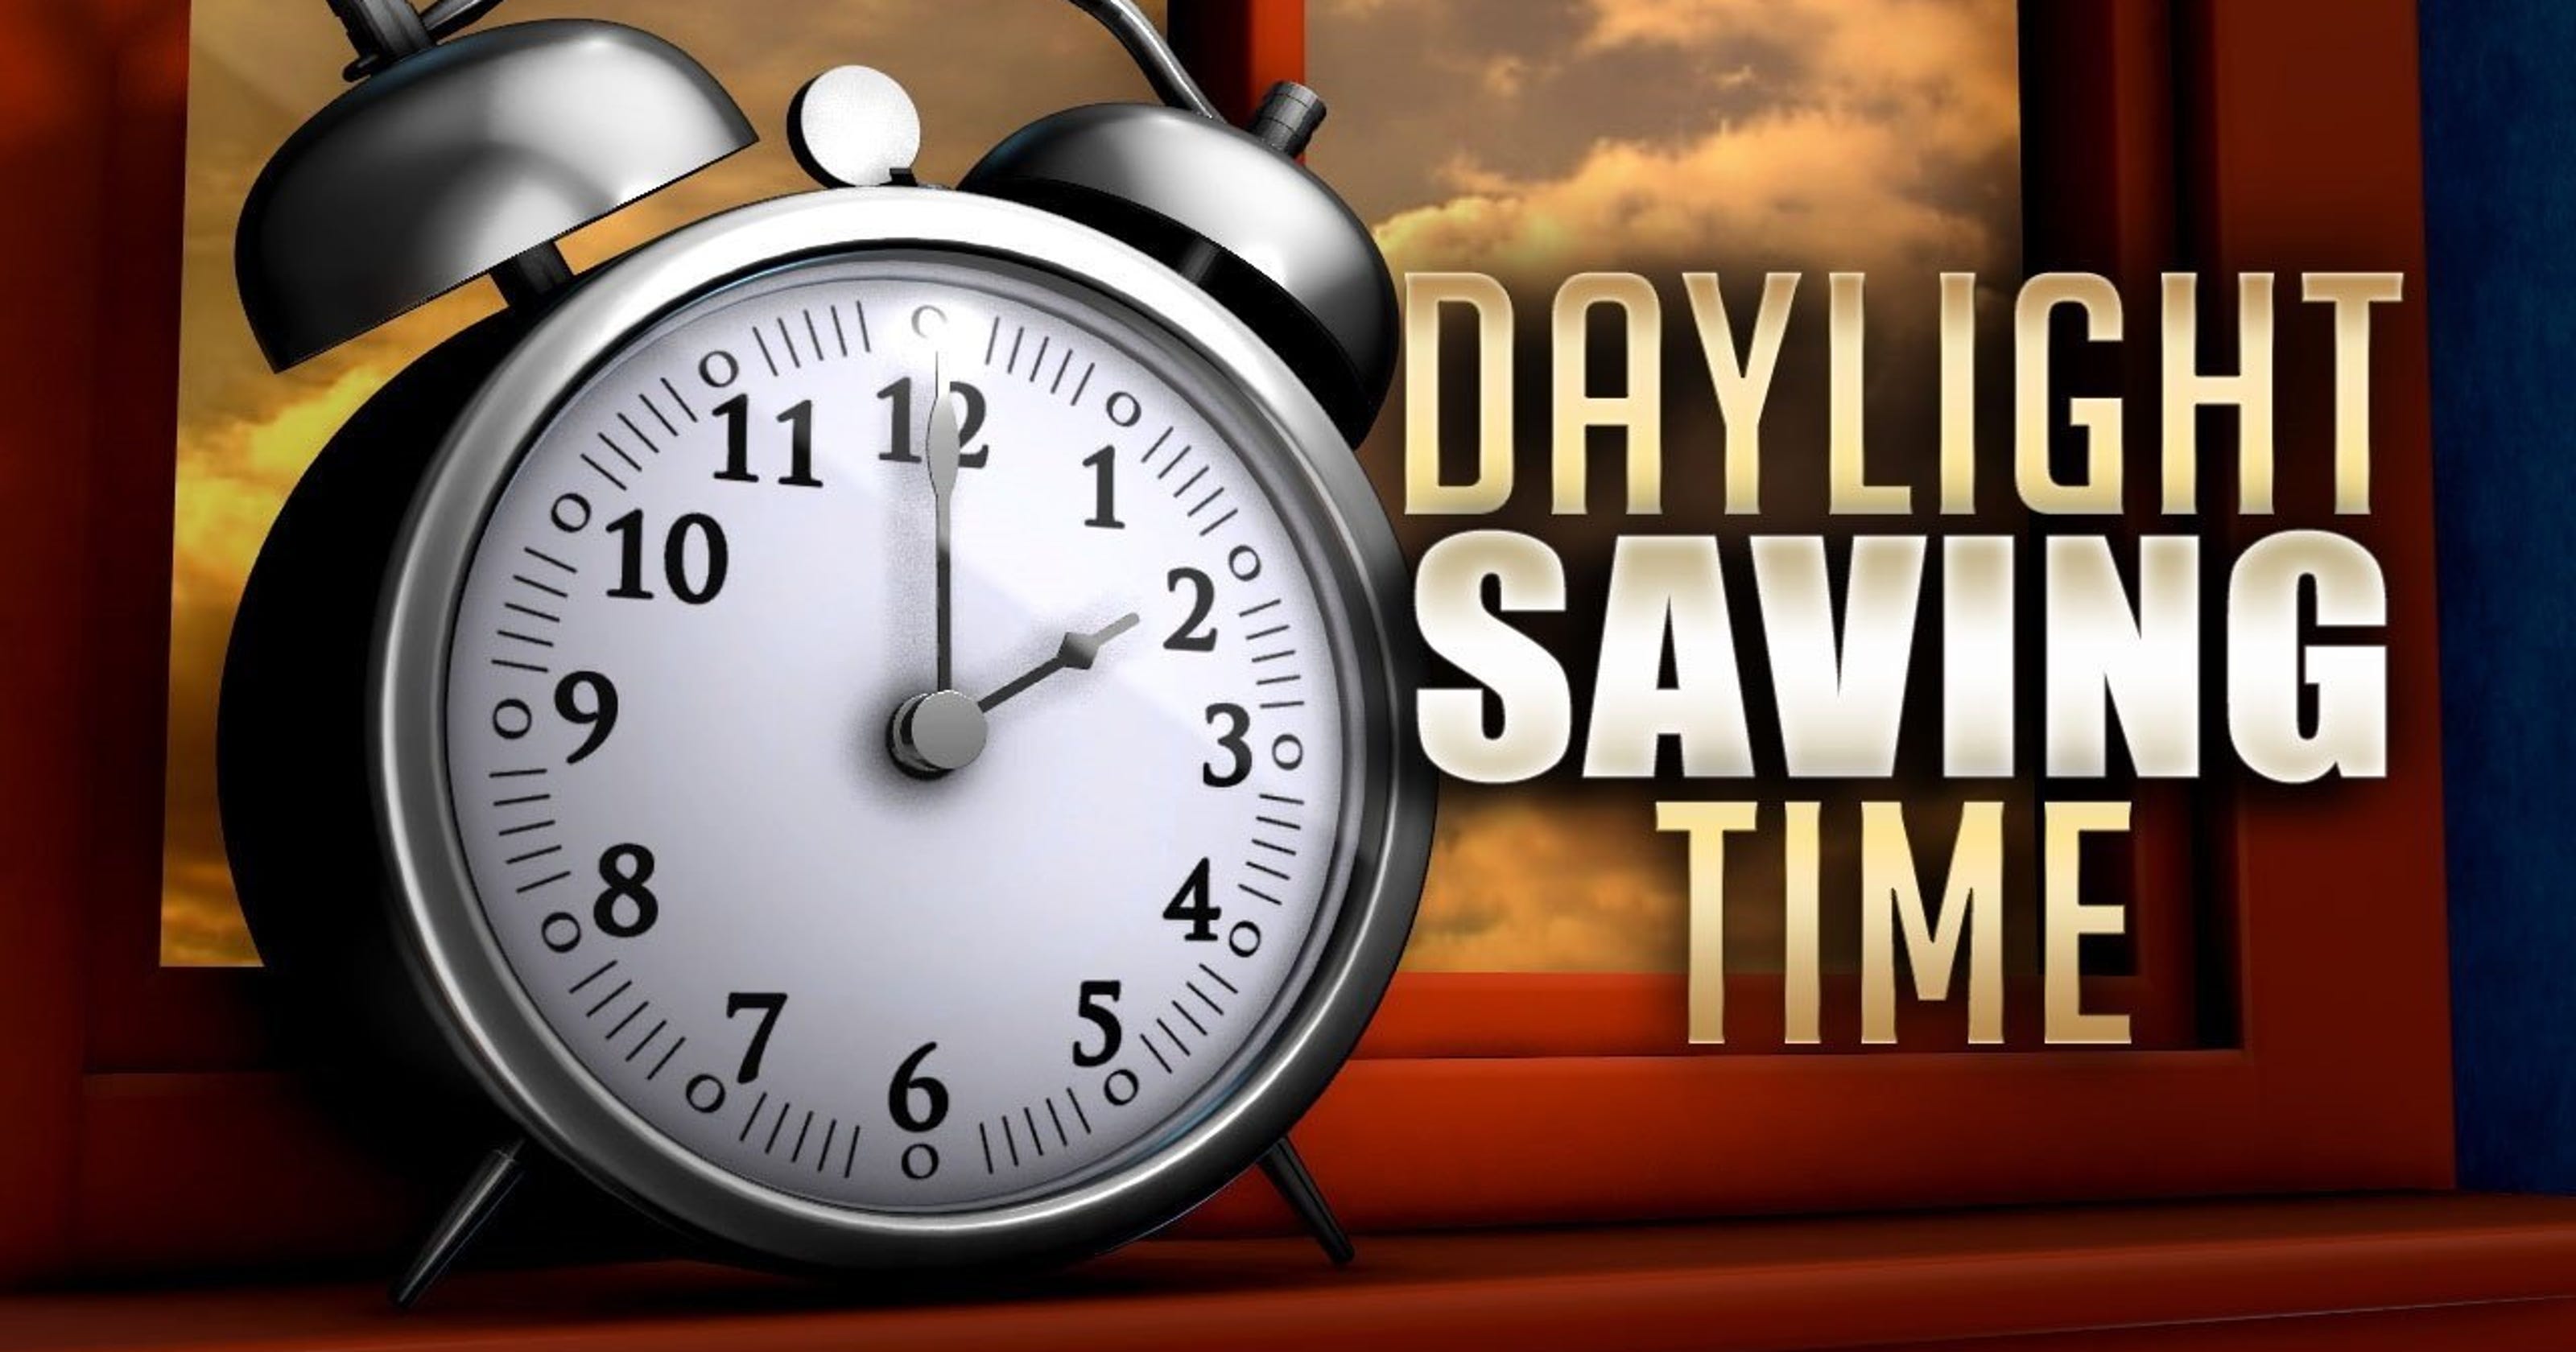 Daylight Saving Time 2018 Health tips for next year's time change